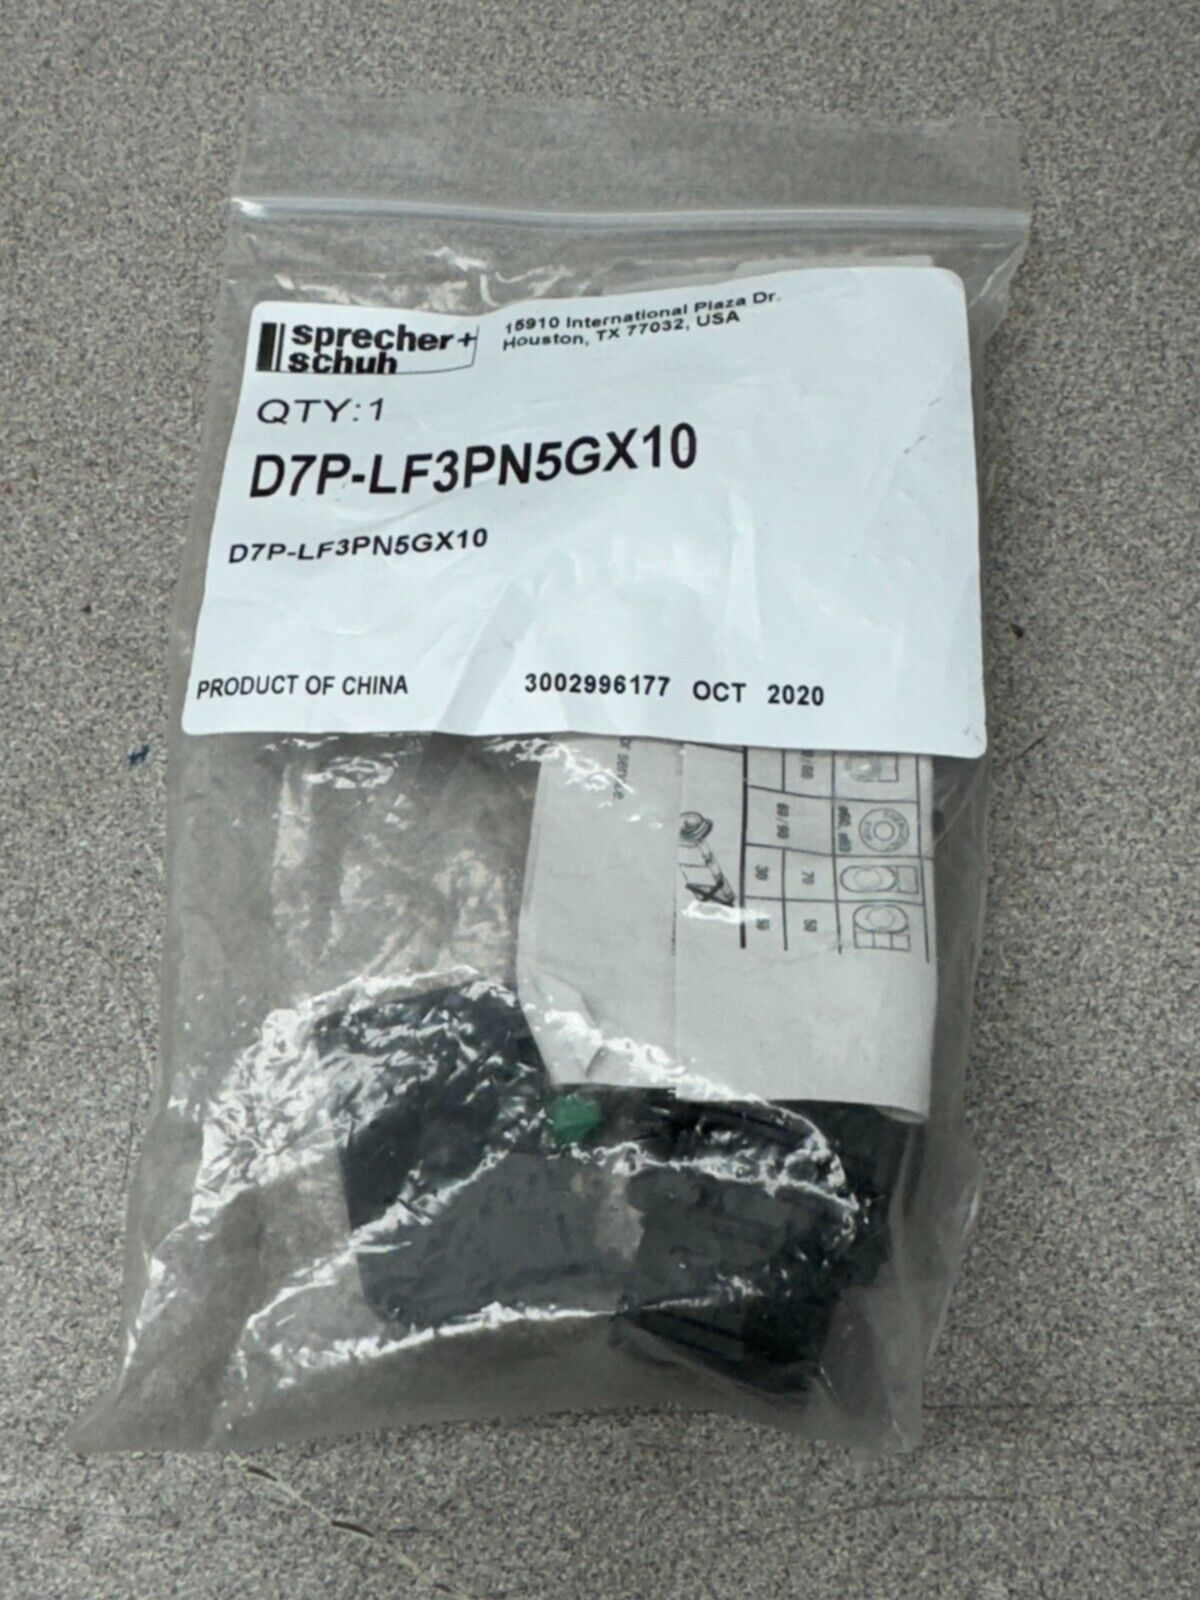 NEW IN PACKAGE SPRECHER SCHUH PUSH BUTTON SWITCH D7P-LF3PN5GX10